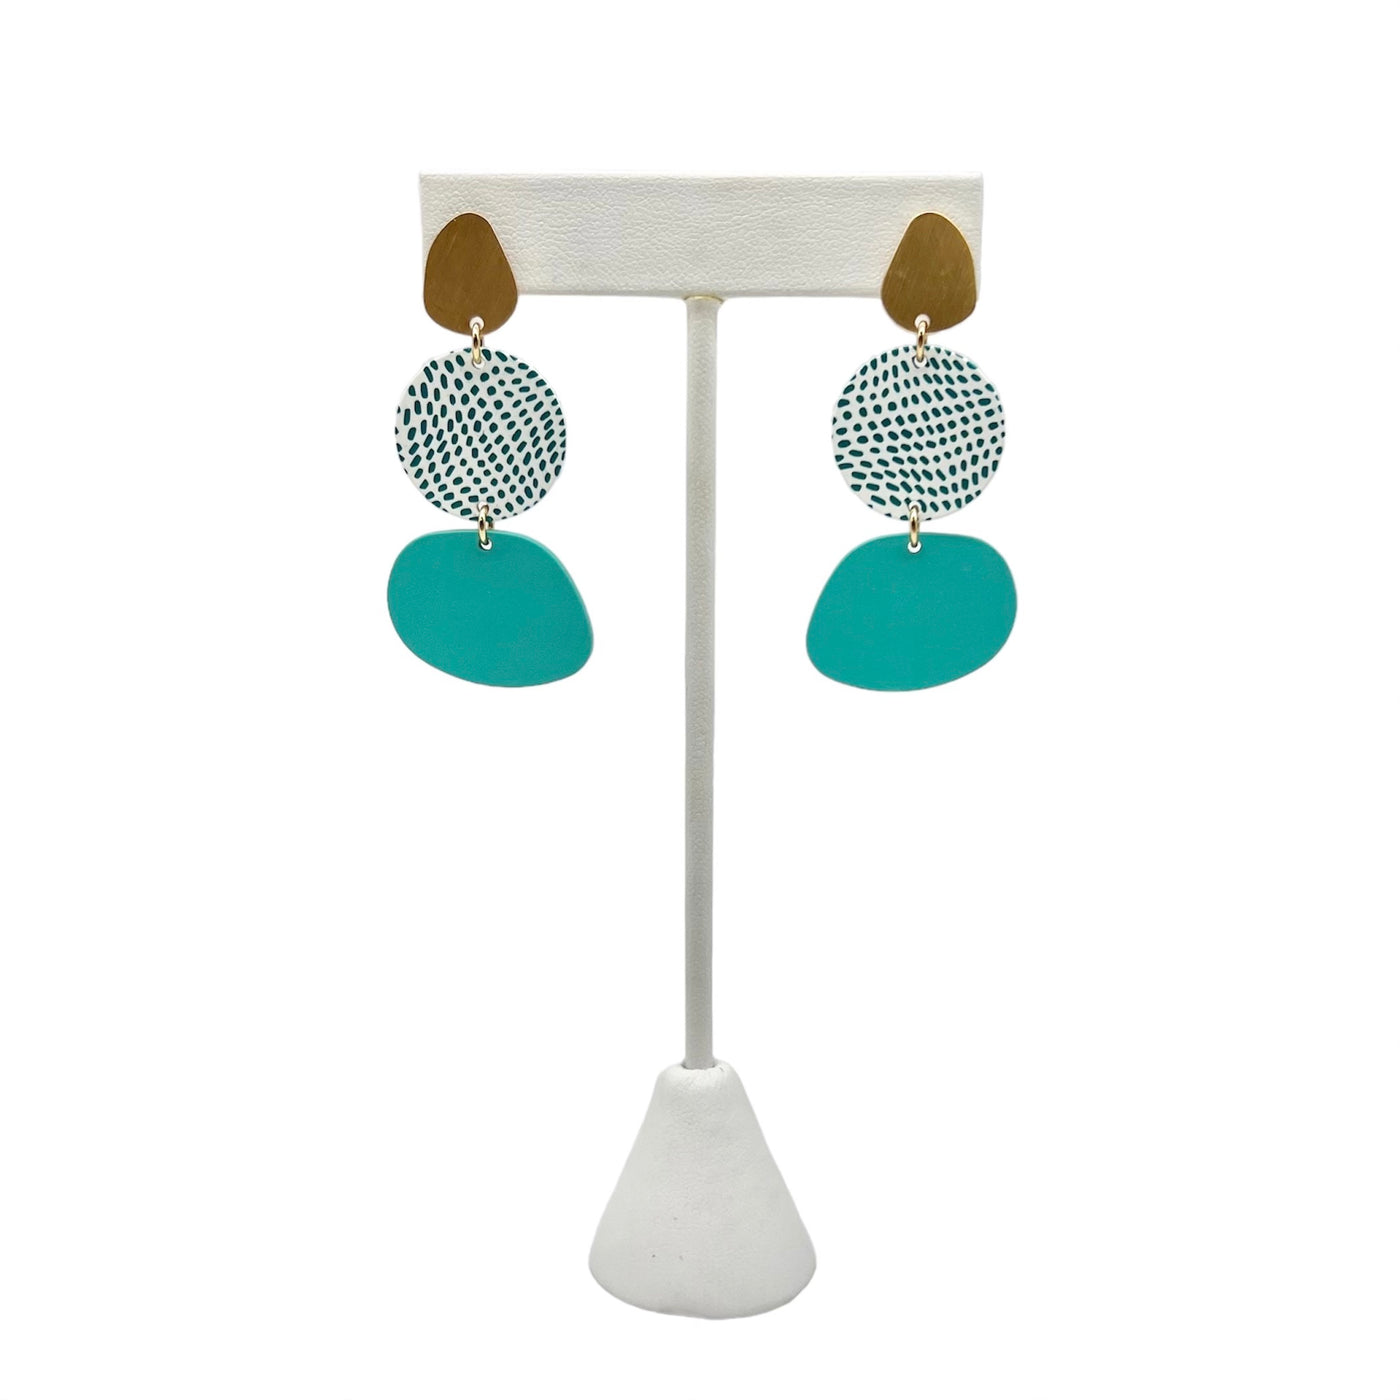 Gold, Textured, and Teal Color Coated Metal 3 Drop 2.25" Earring